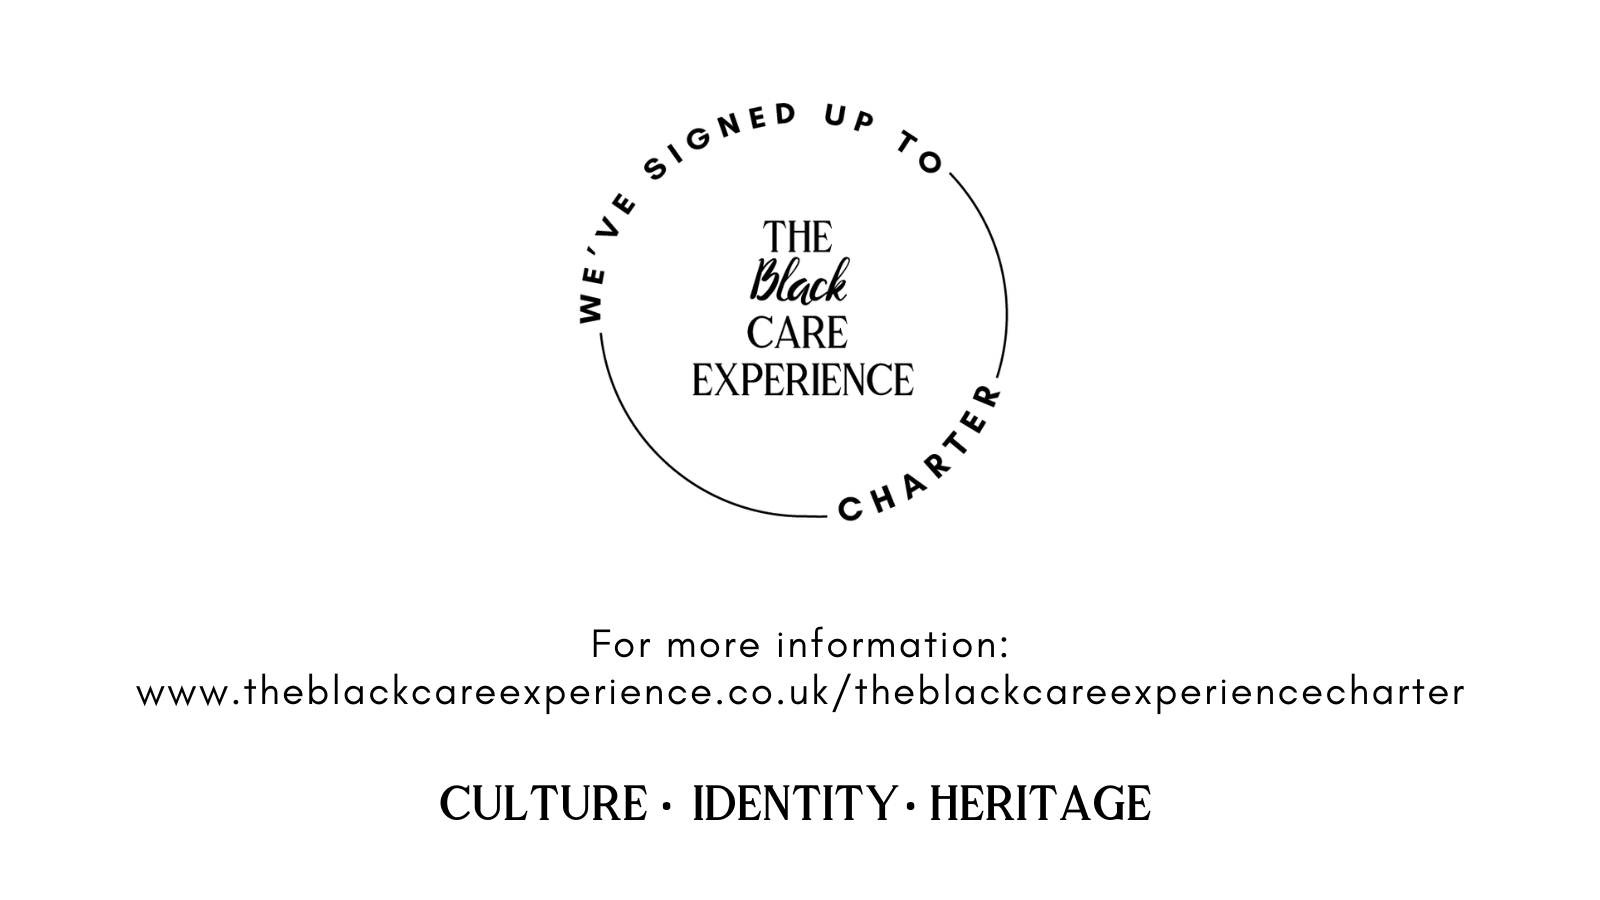 The Black Care Experience Charter